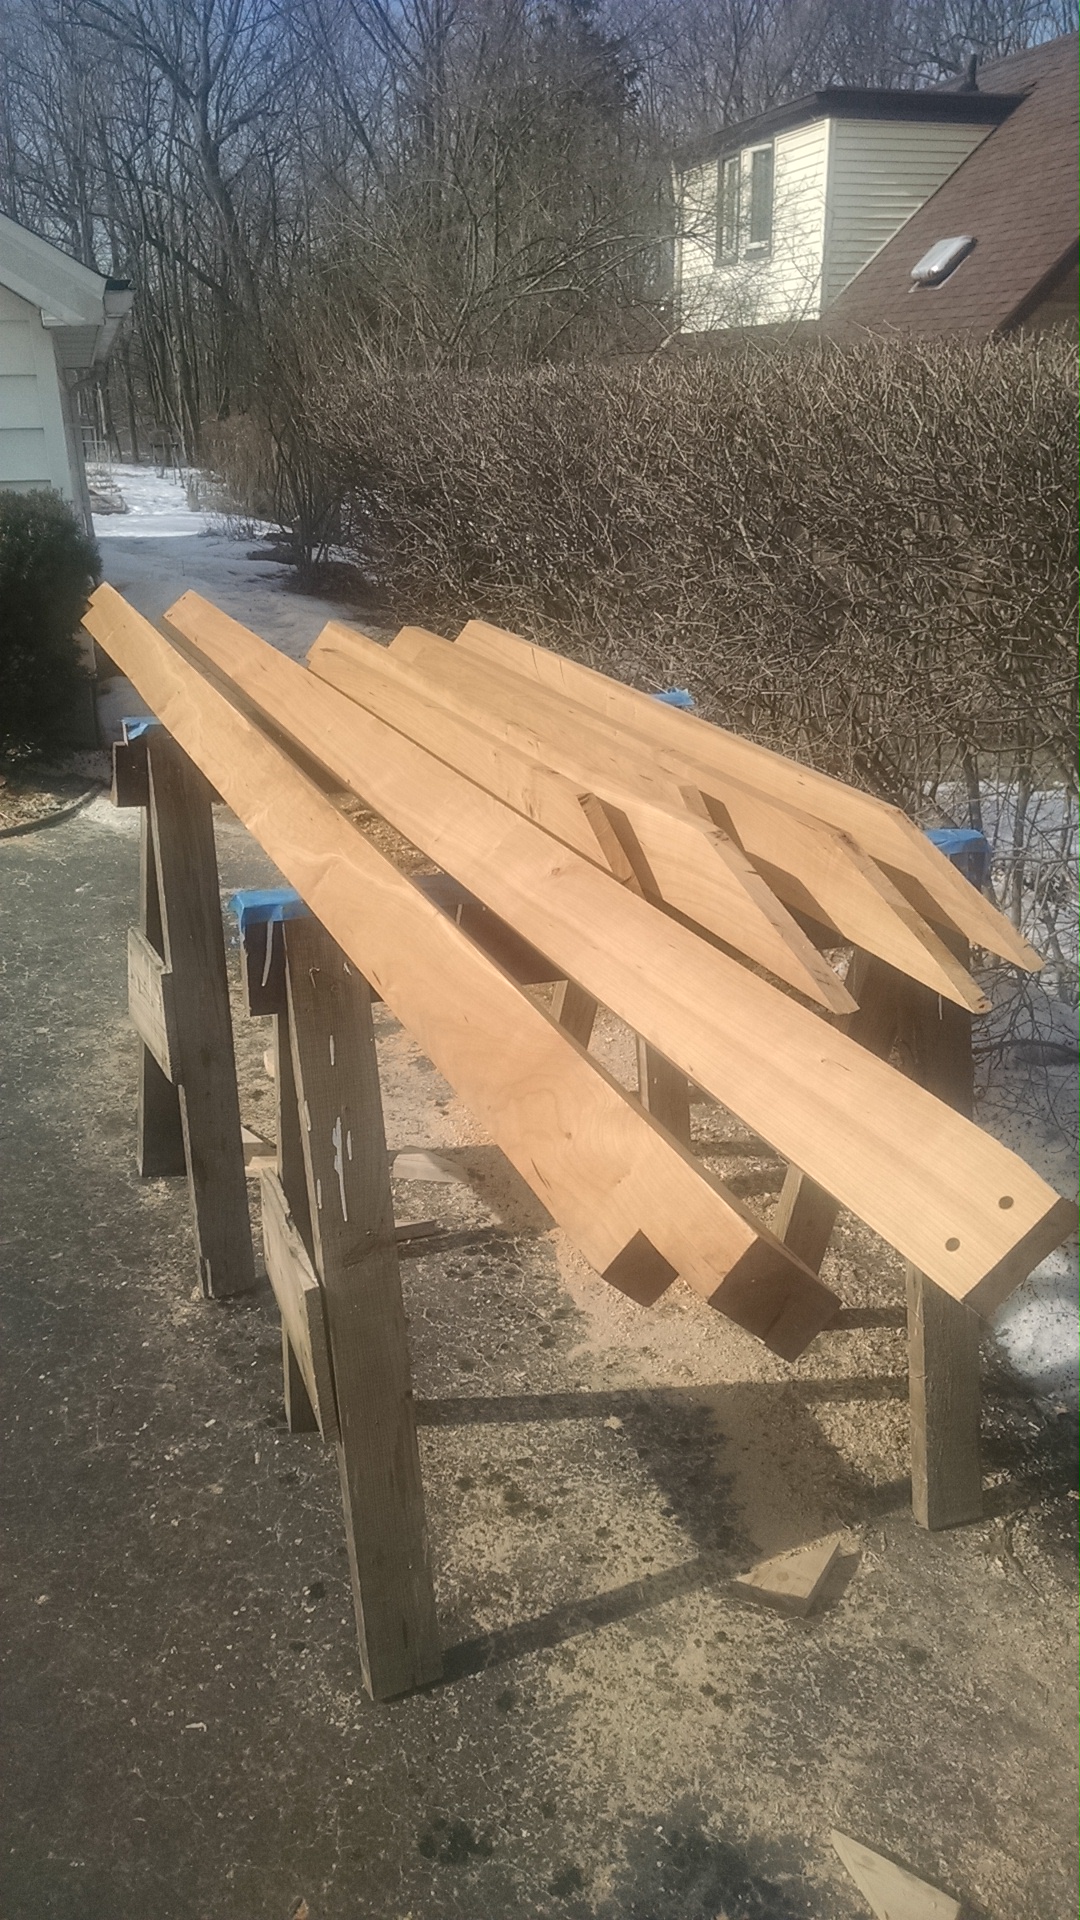 here are the loft beams and collar ties drying after a danish oil application